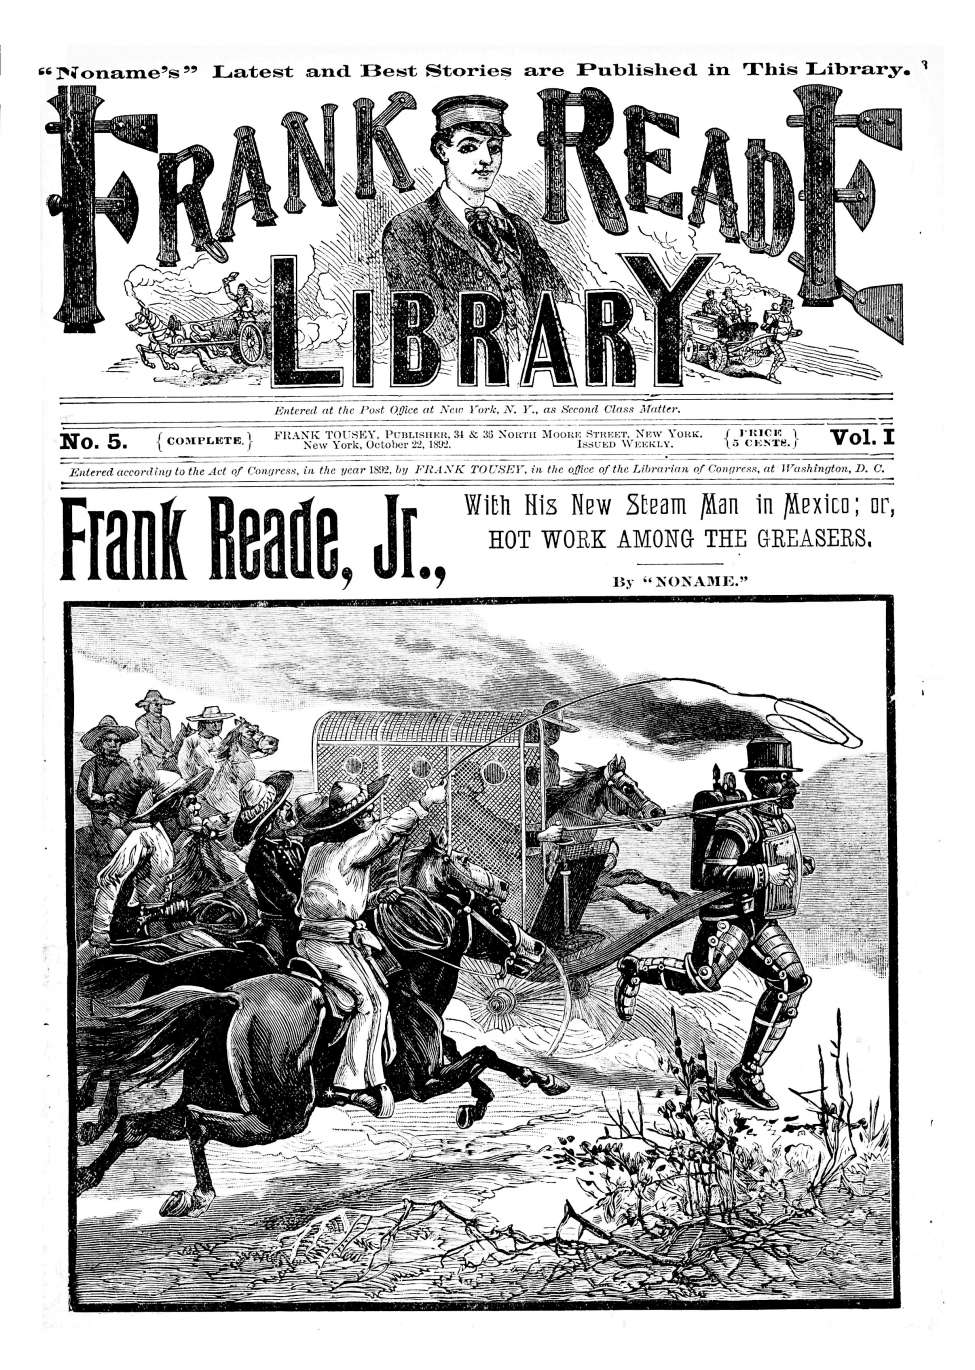 Book Cover For v01 5 - Frank Reade, Jr., with His New Steam Man in Mexico